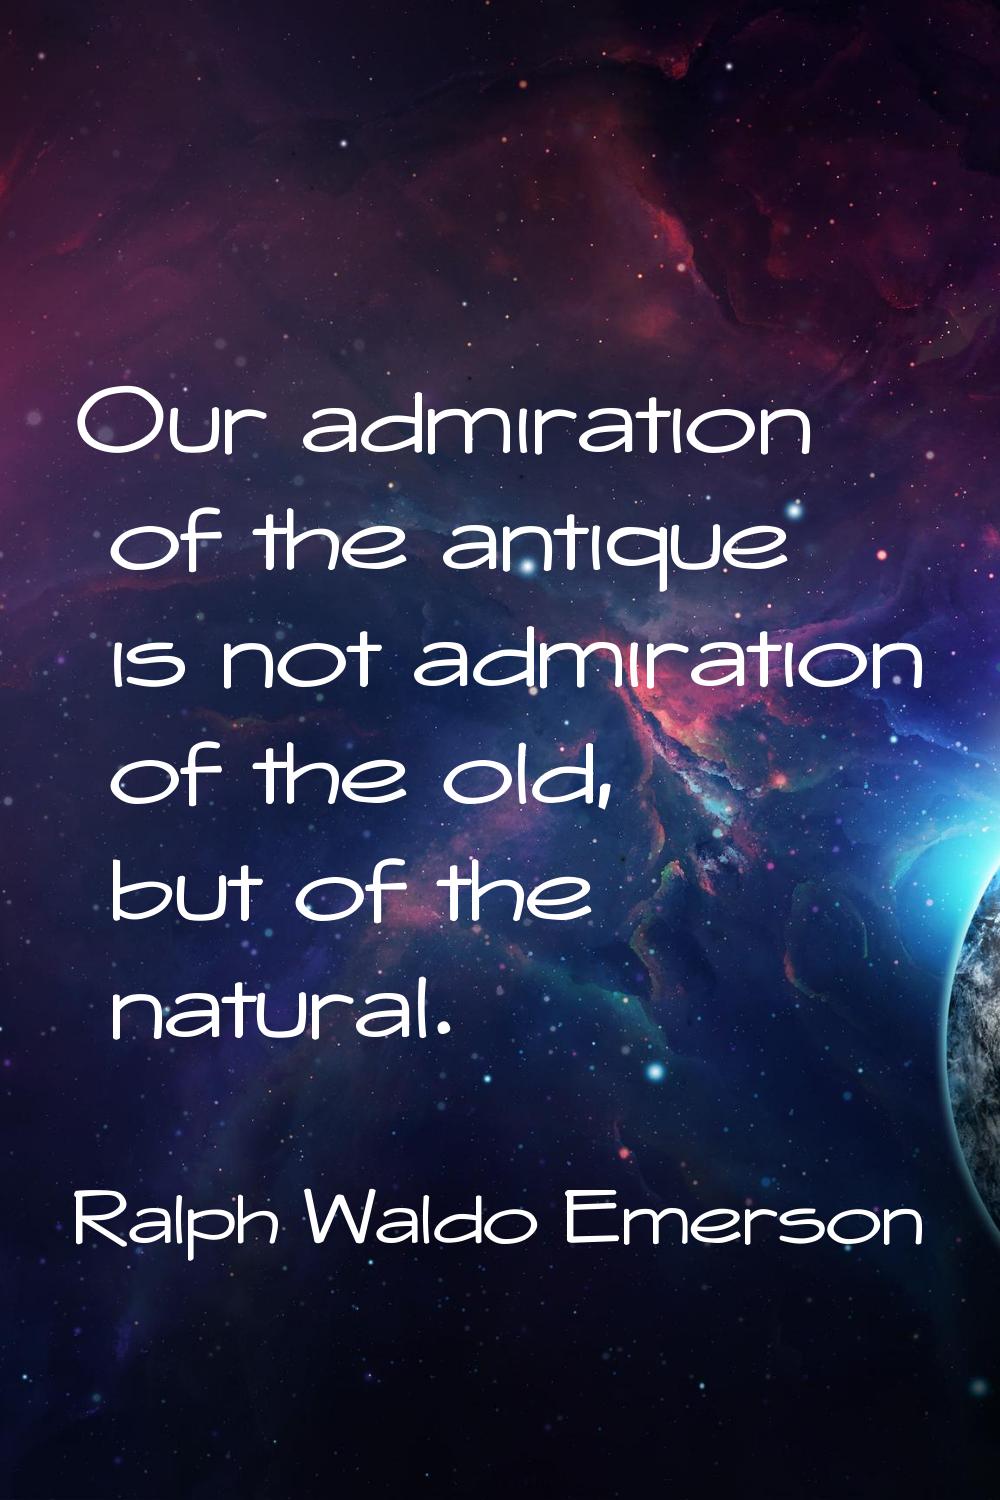 Our admiration of the antique is not admiration of the old, but of the natural.